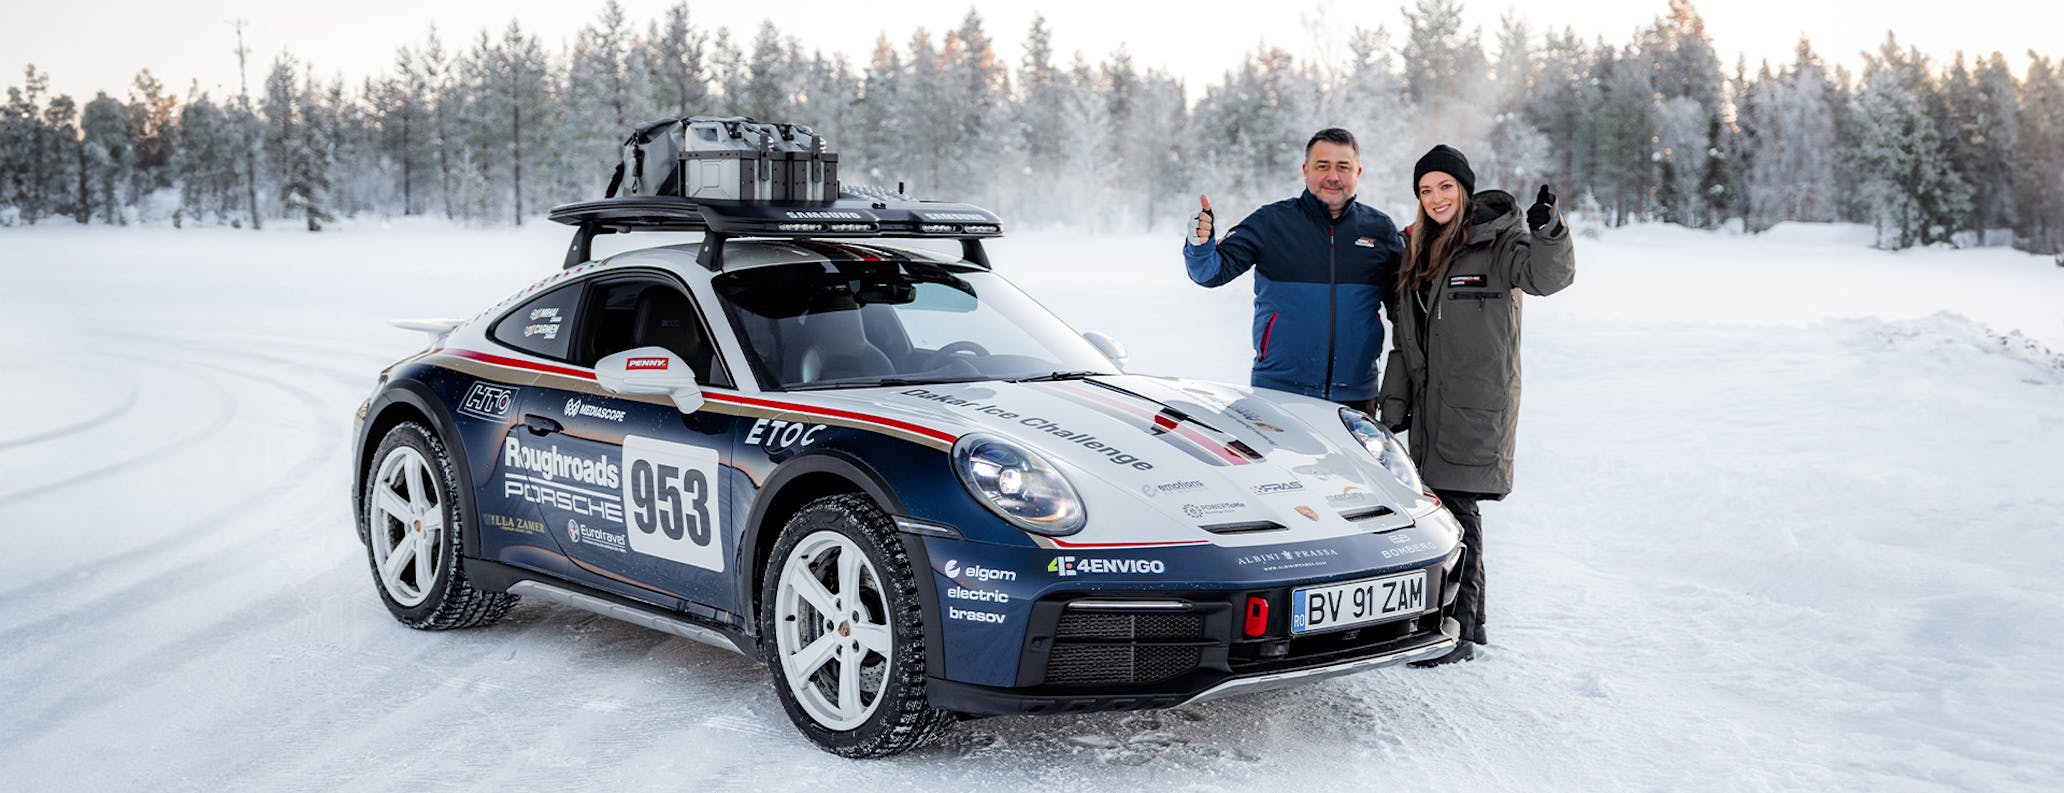 Man and woman stand next to 911 Dakar on snow